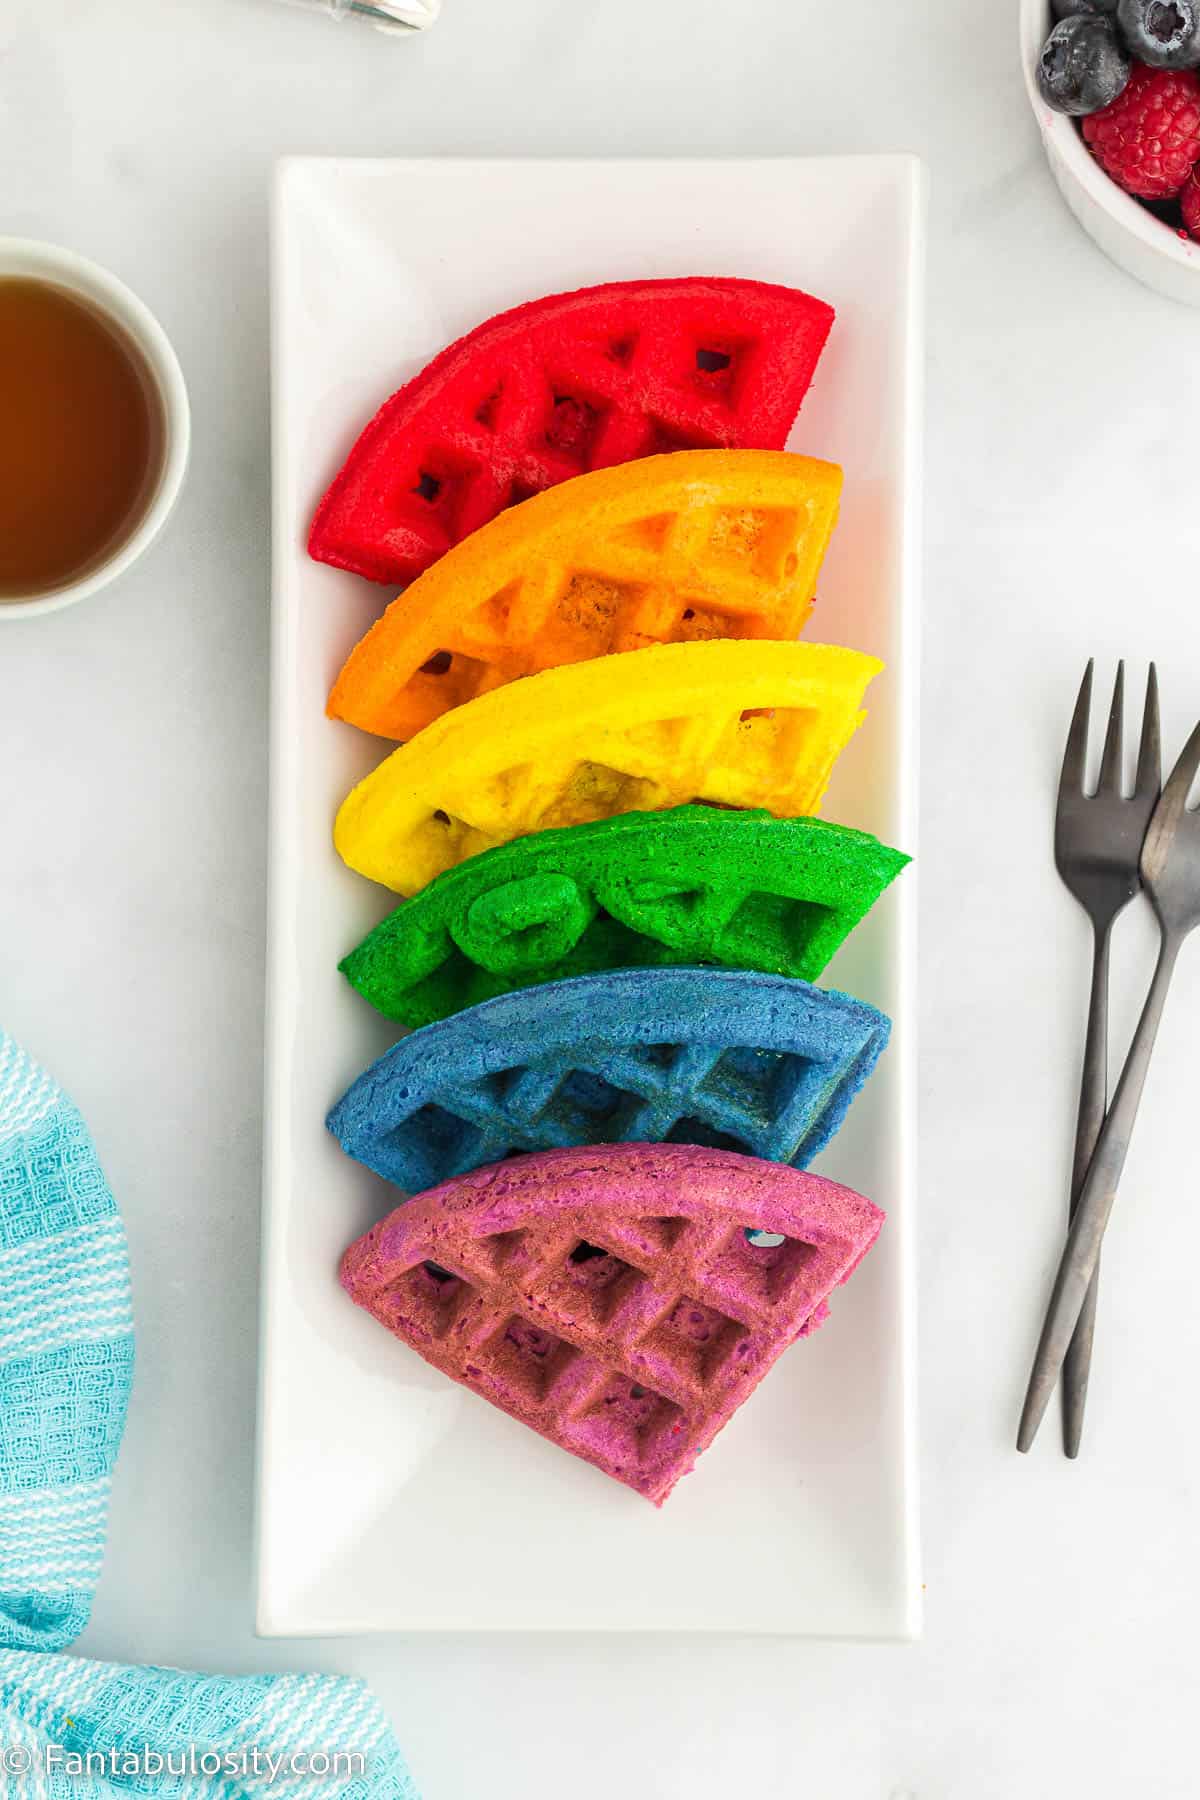 Colored waffles arranged on a white plate.